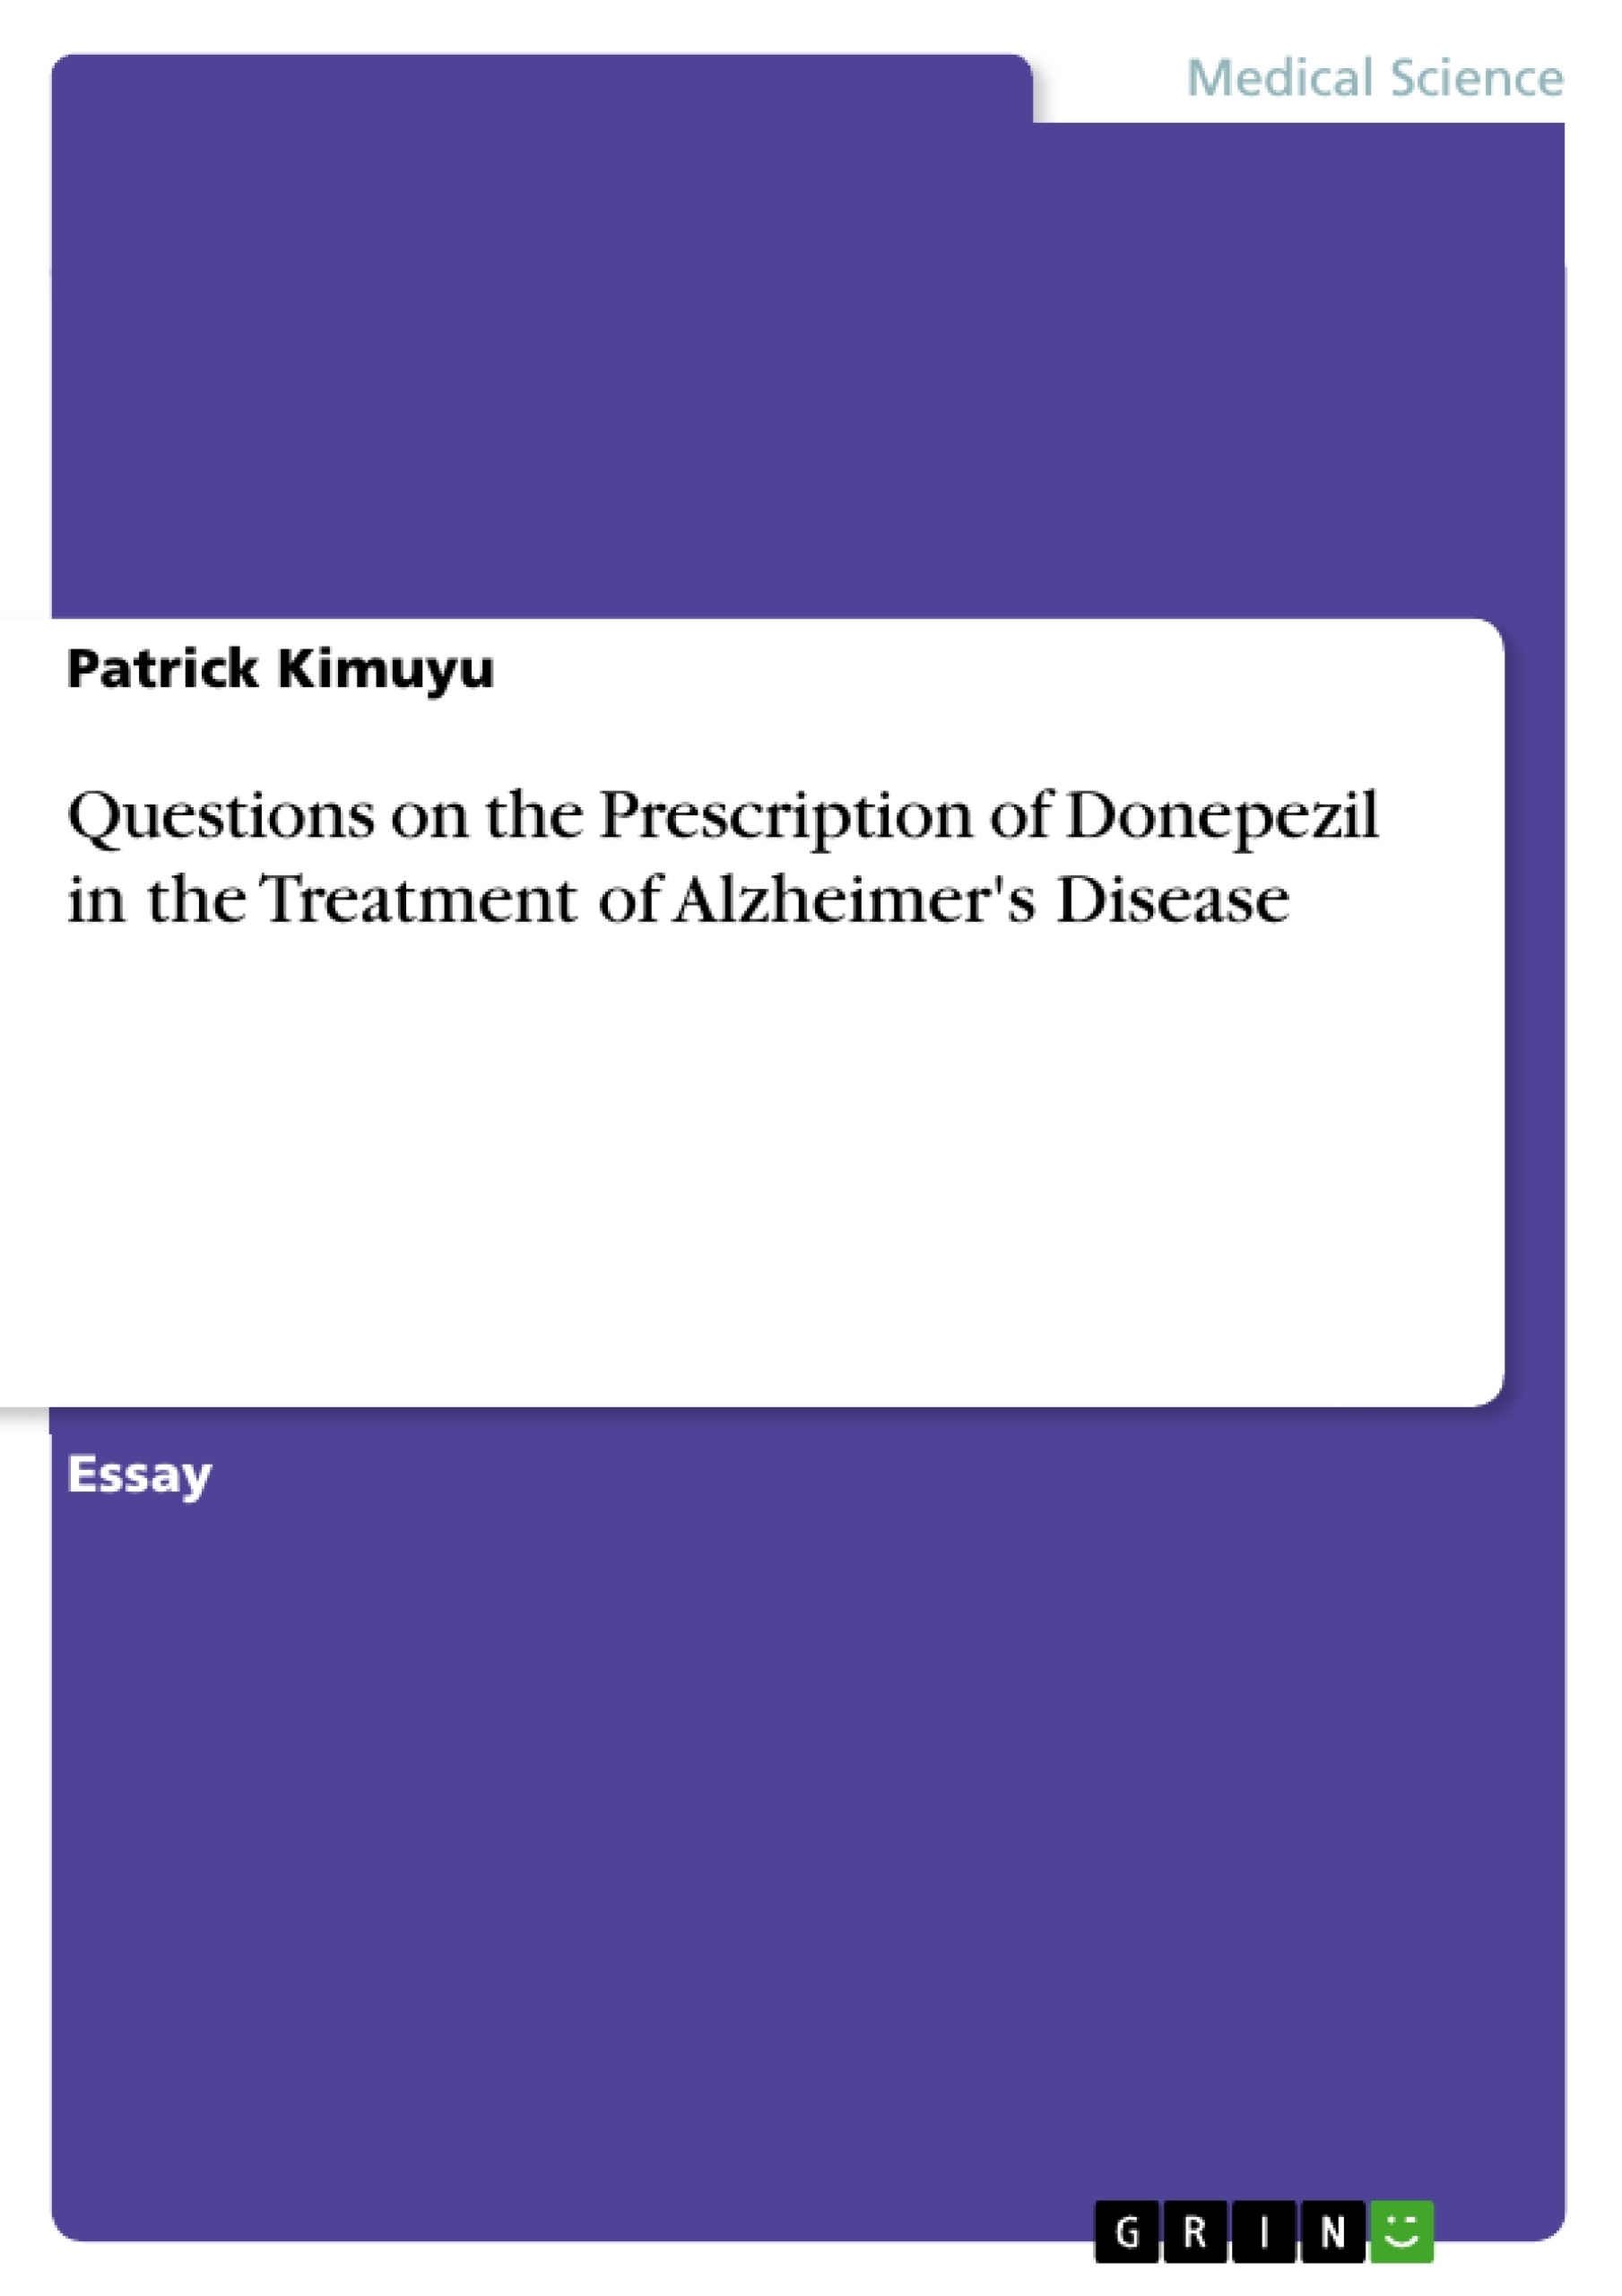 Titre: Questions on the Prescription of Donepezil in the Treatment of Alzheimer's Disease